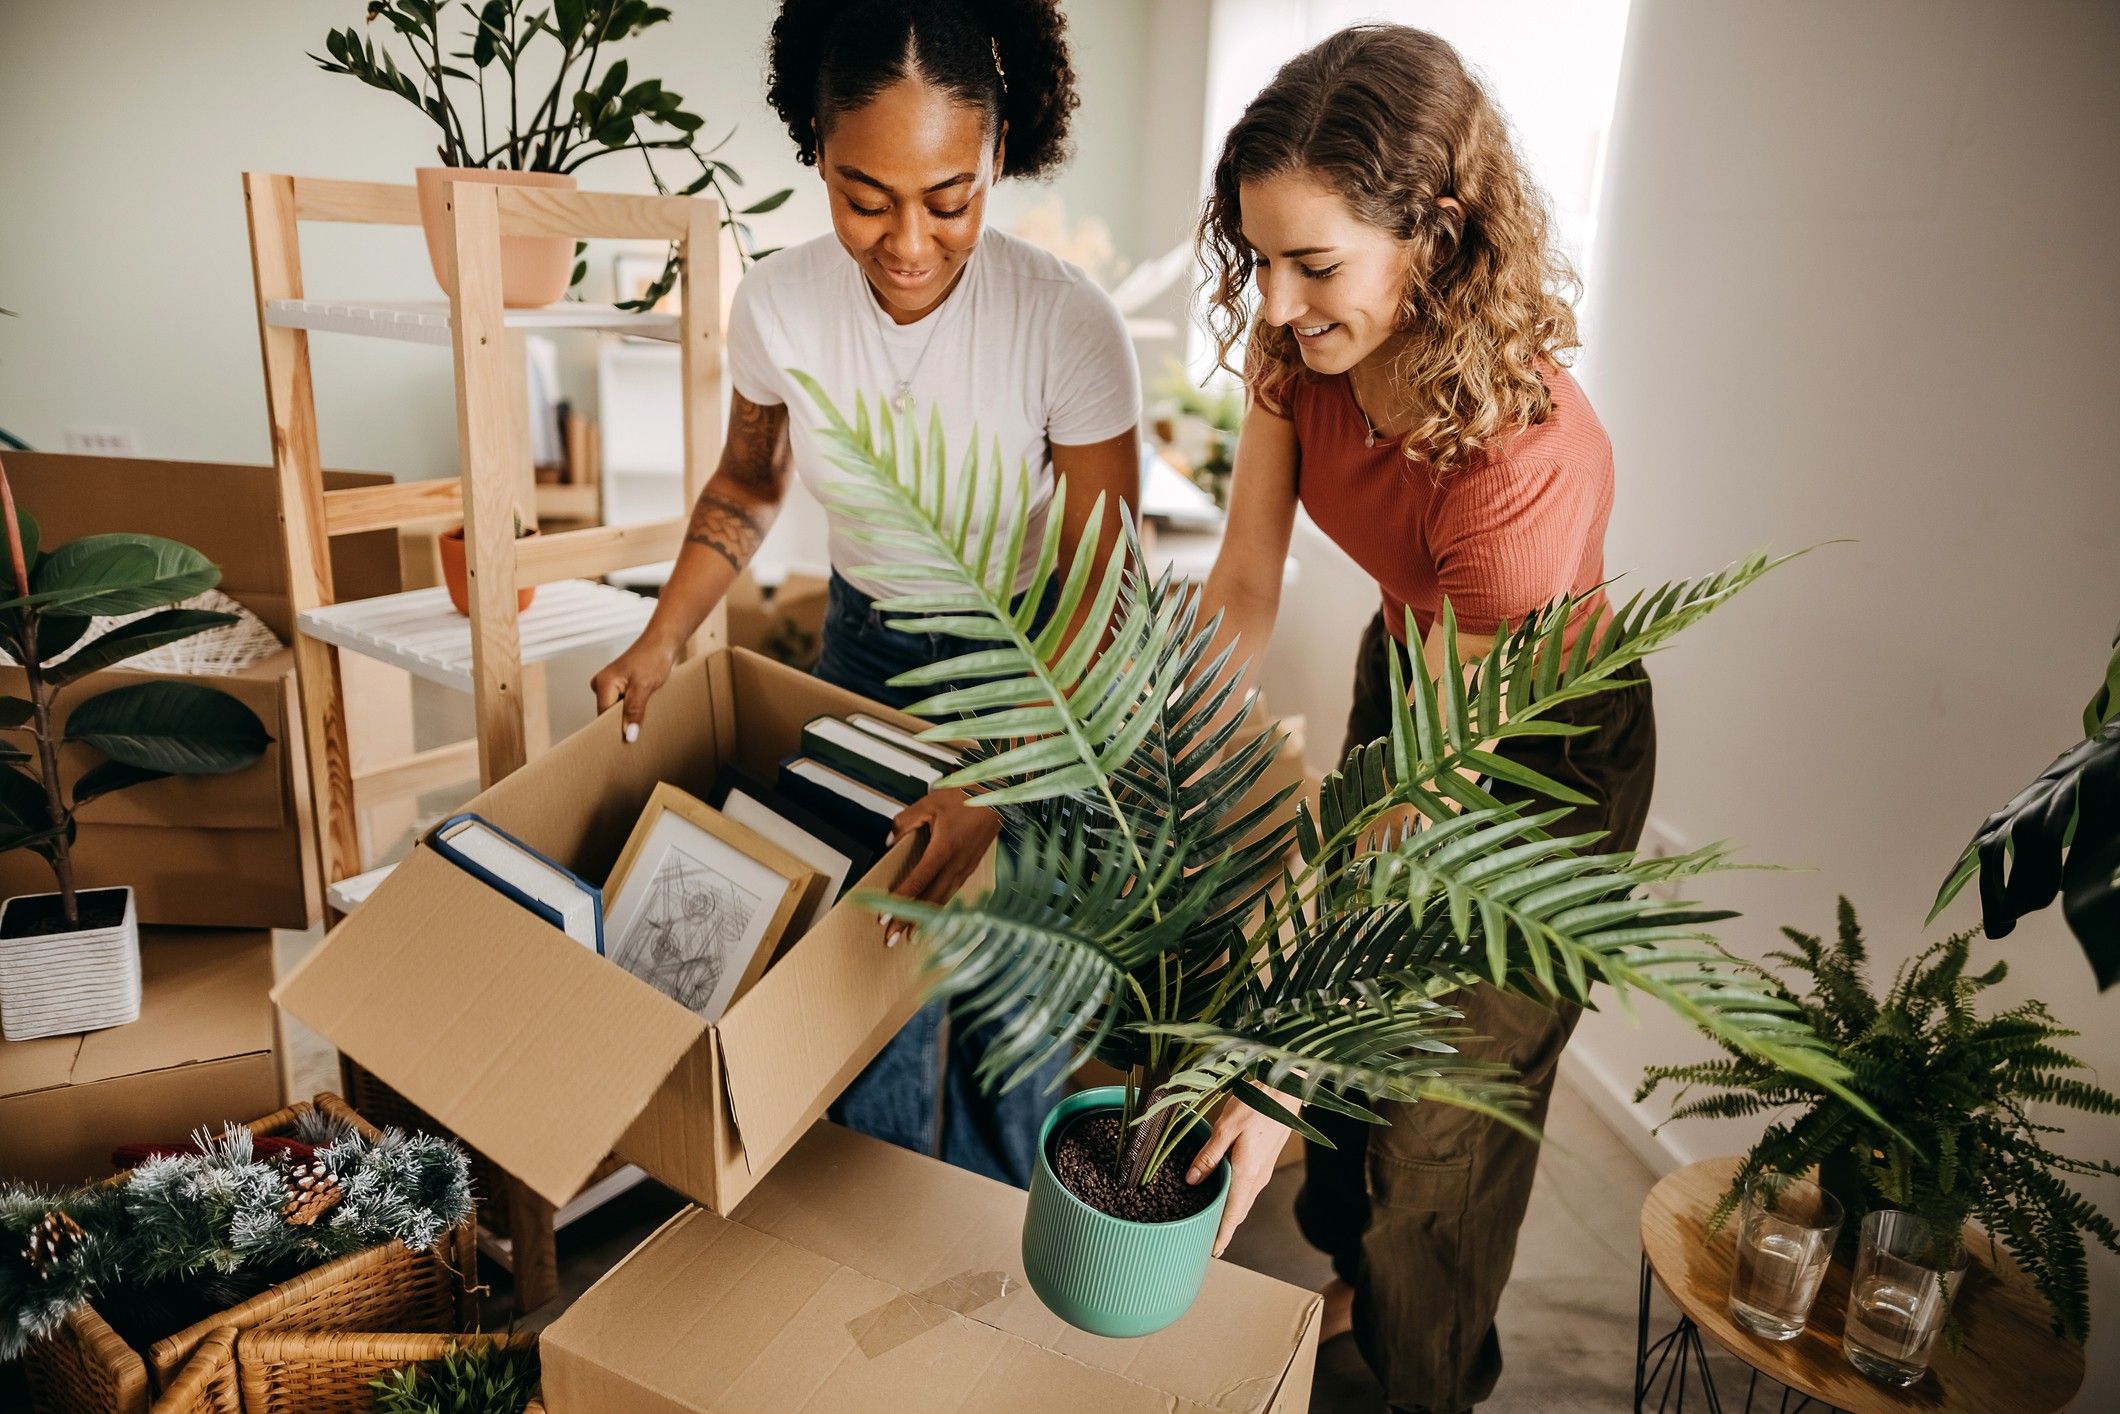 Two women pack up boxes and plants.